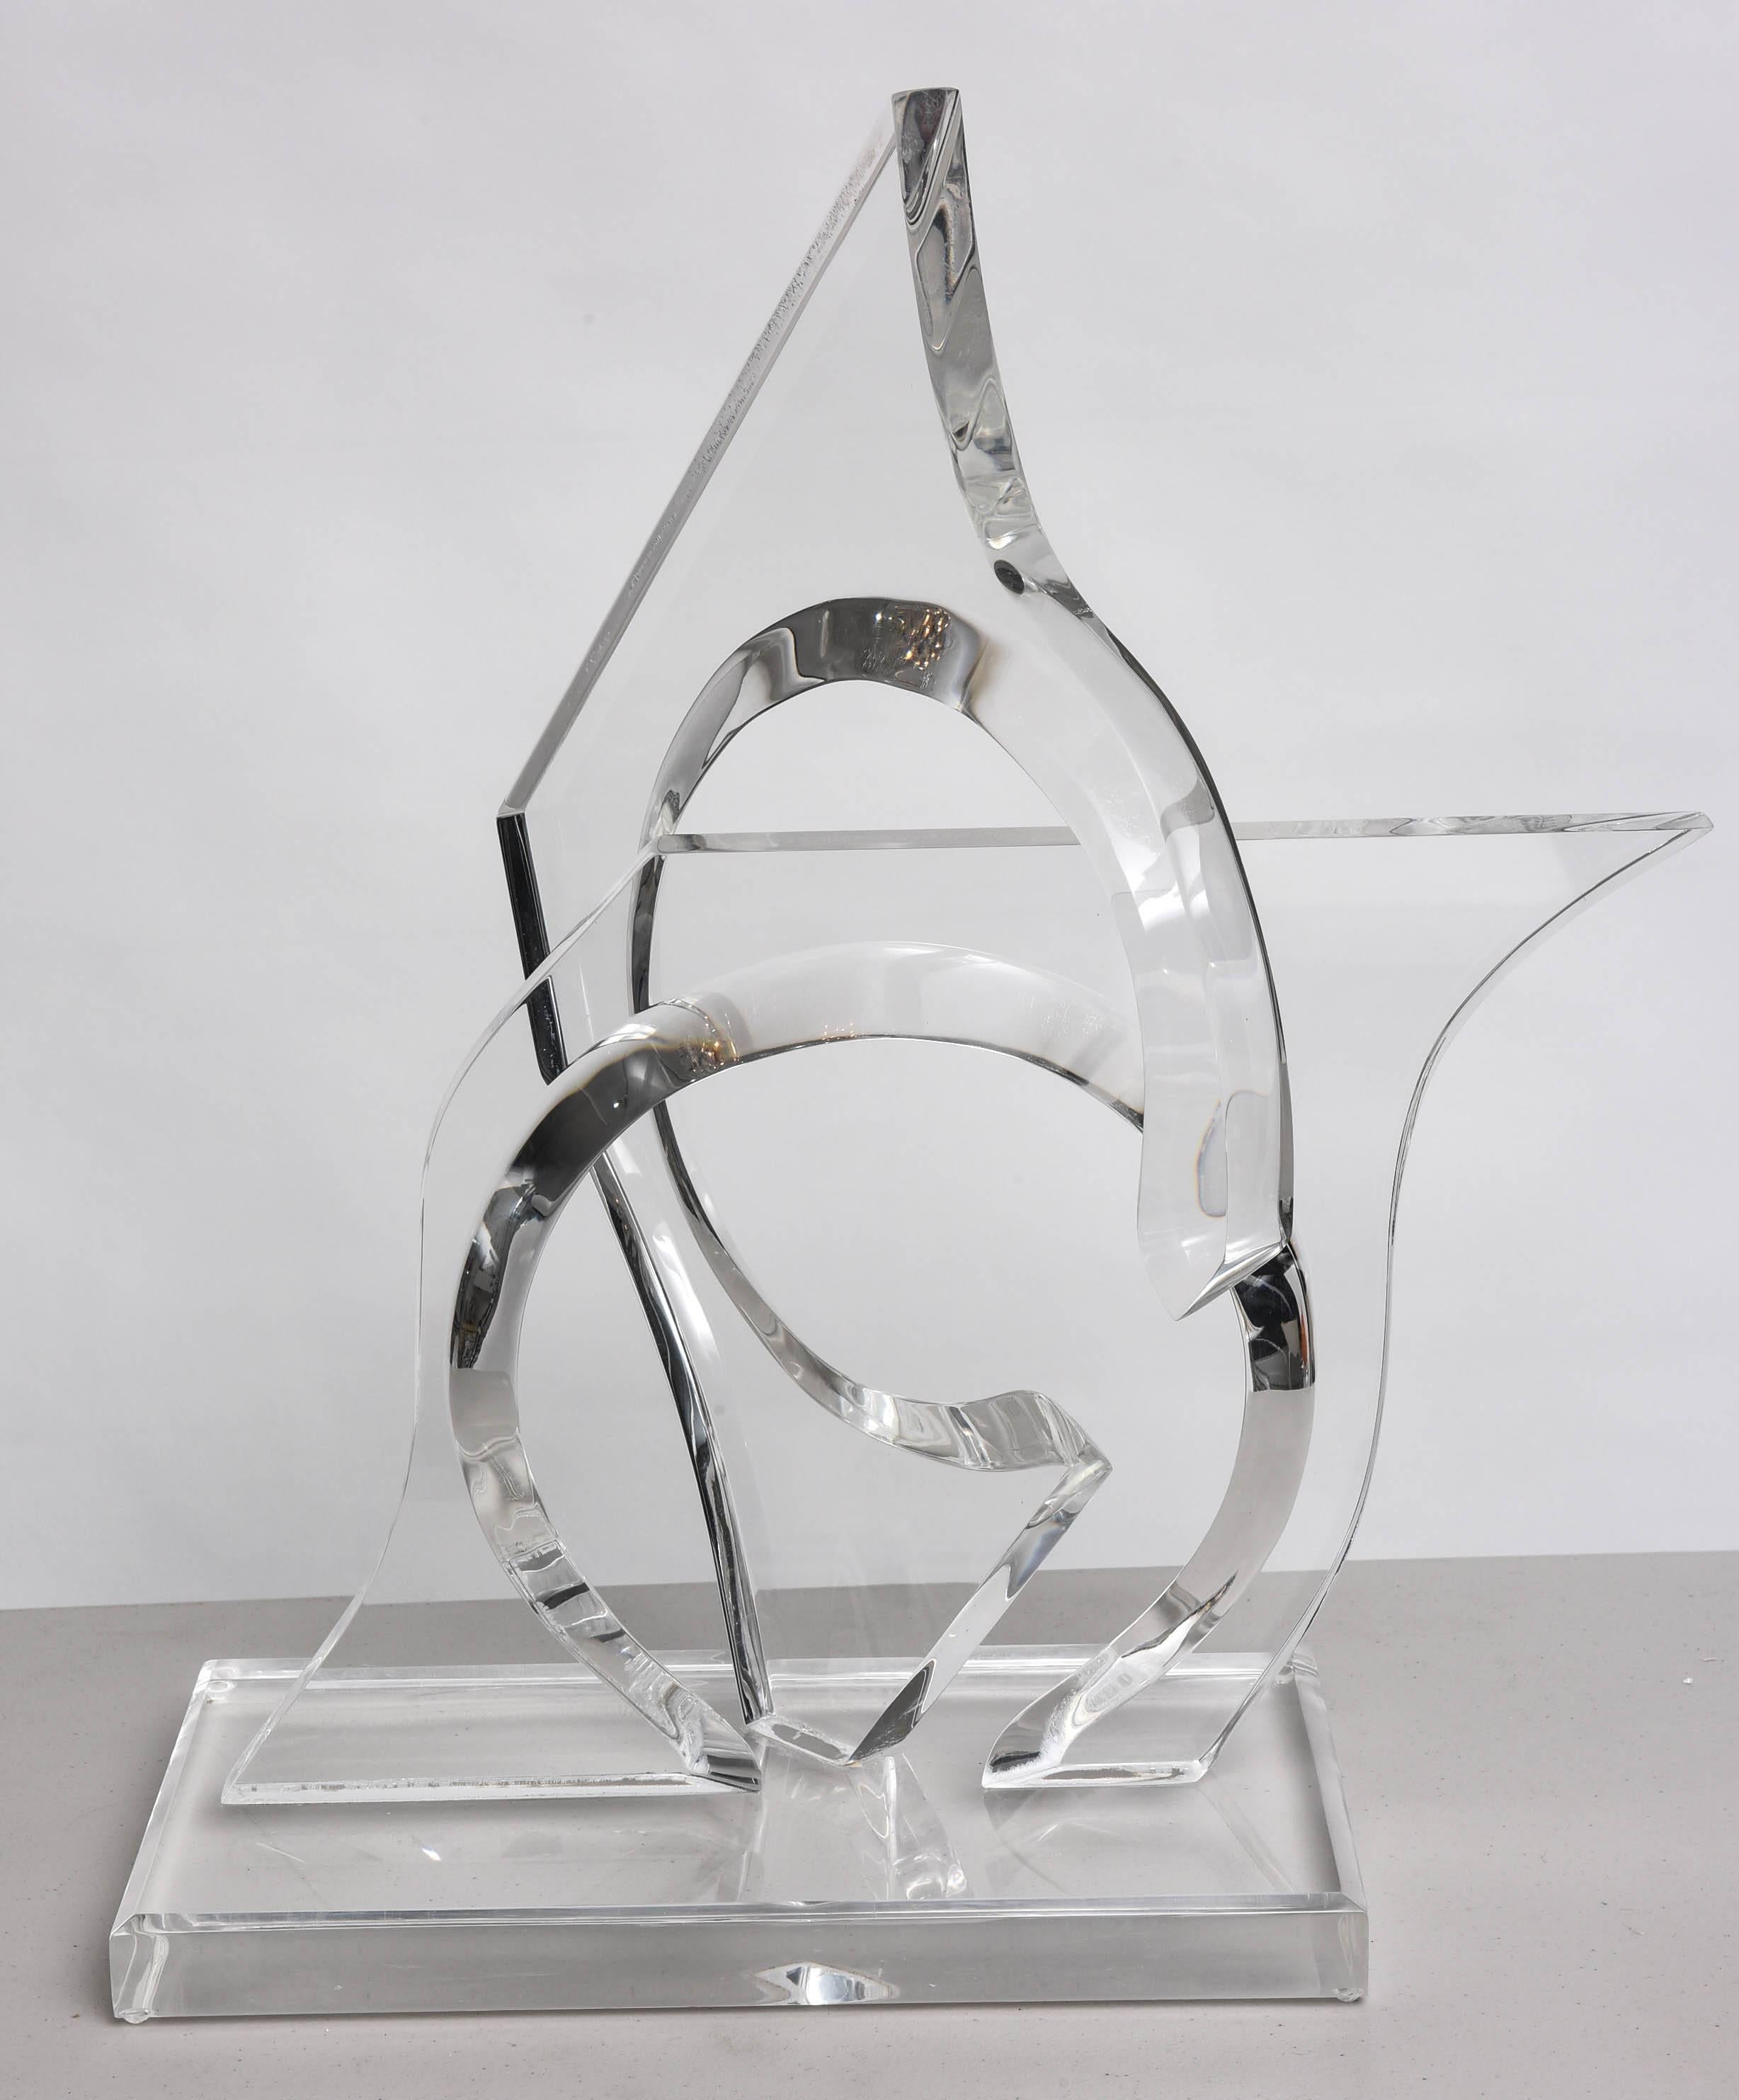 This amazing lucite sculpture was created by the iconic firm of Hivo Van Teal in the 1970s.  The free-form interlocking prism-like pieces have a great sense of movement and play as the light passes through them.

The piece is signed on the base